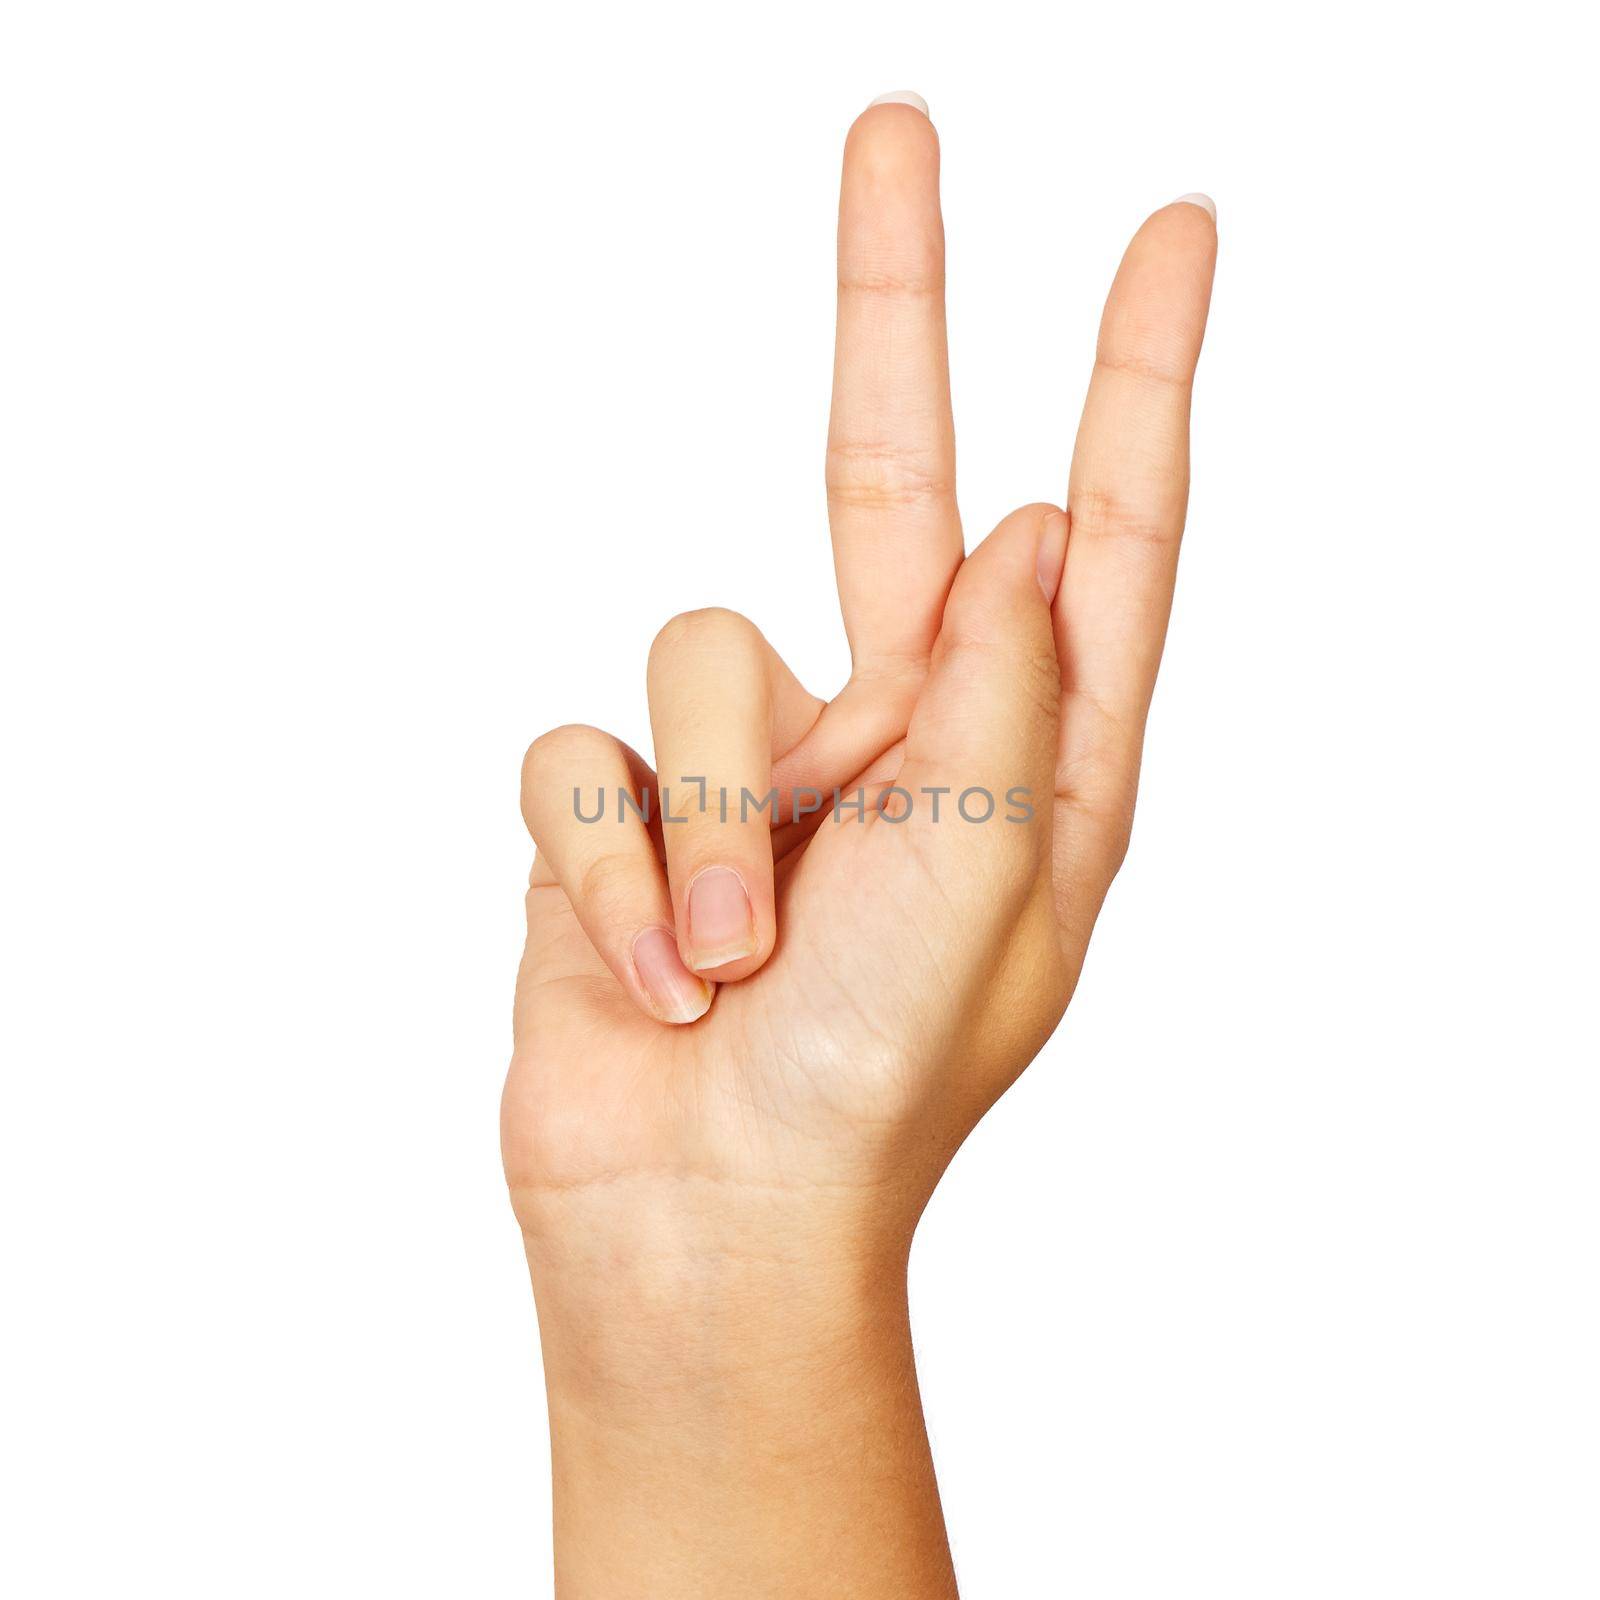 american sign language. female hand showing letter k. isolated on white background